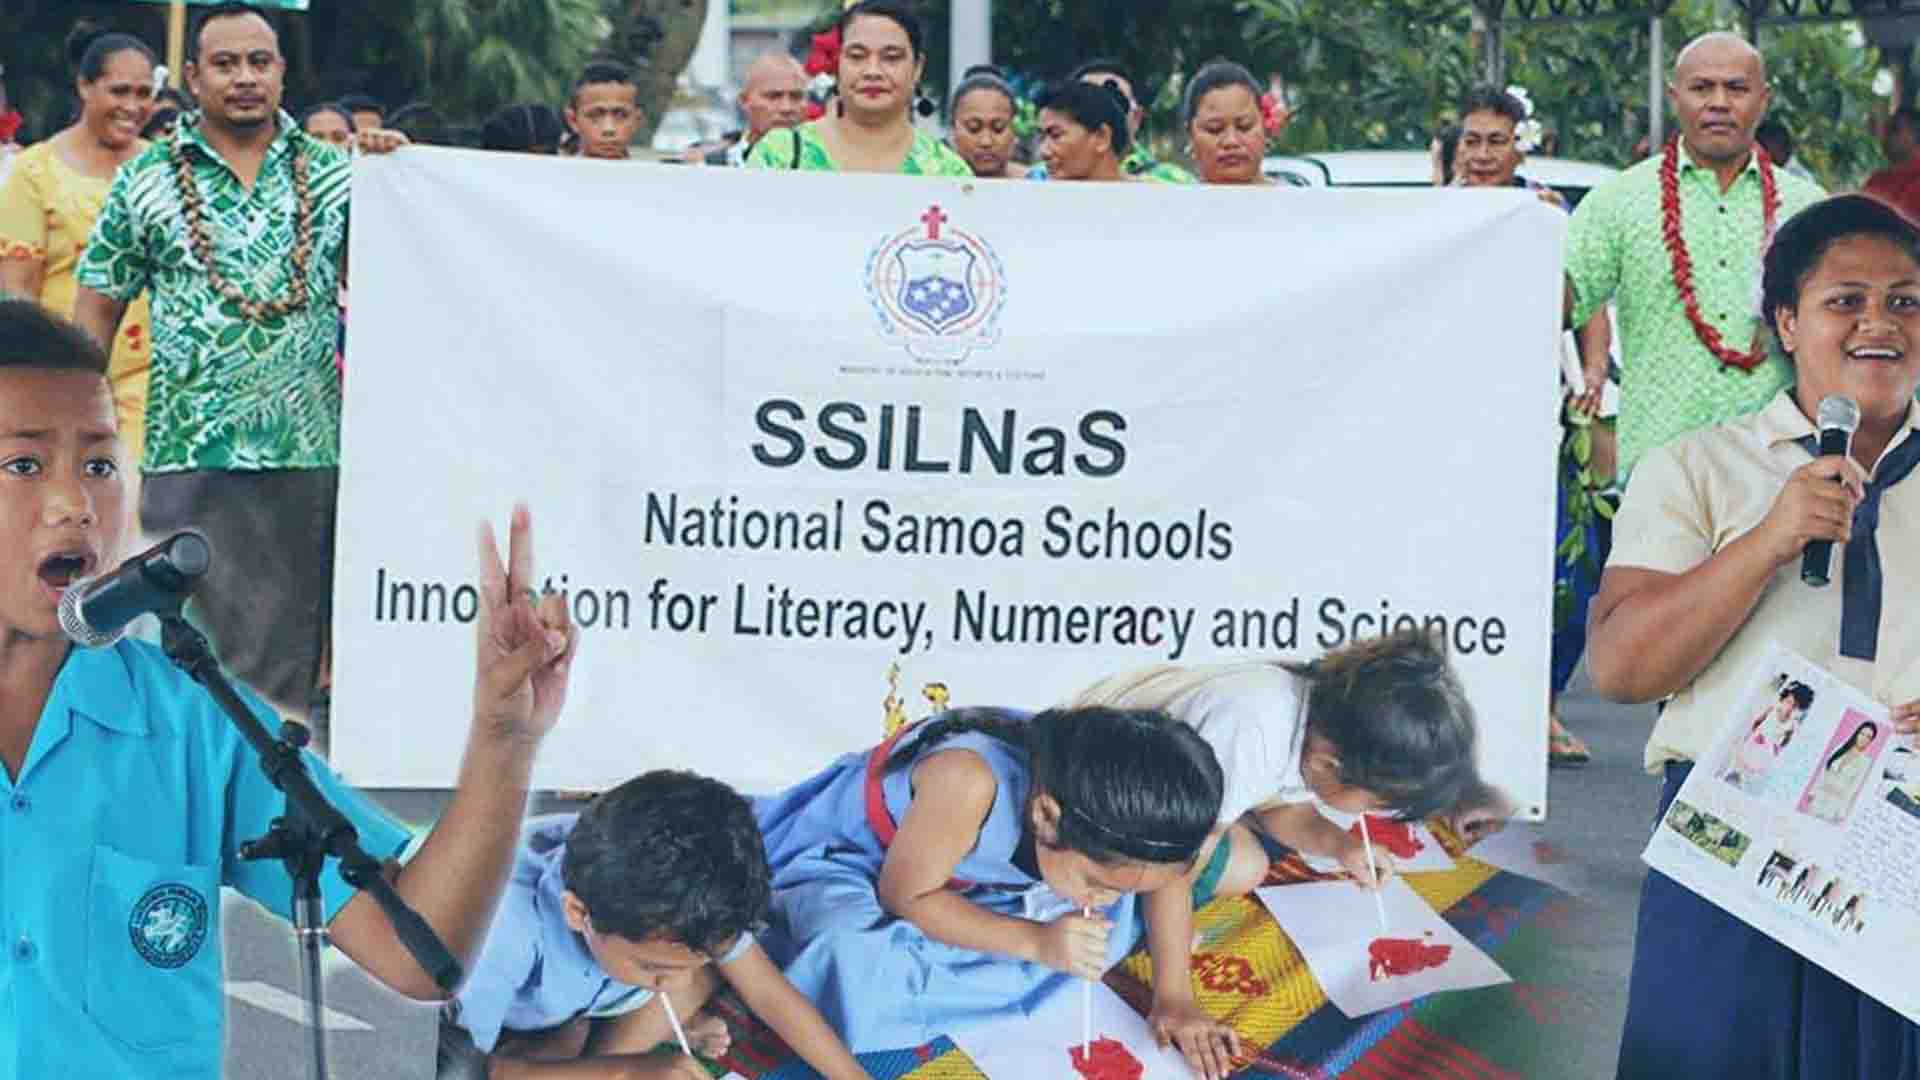 Samoa Schools Innovation For Literacy, Numeracy and Science (SSILNaS) 10th - 30th Oct 2020